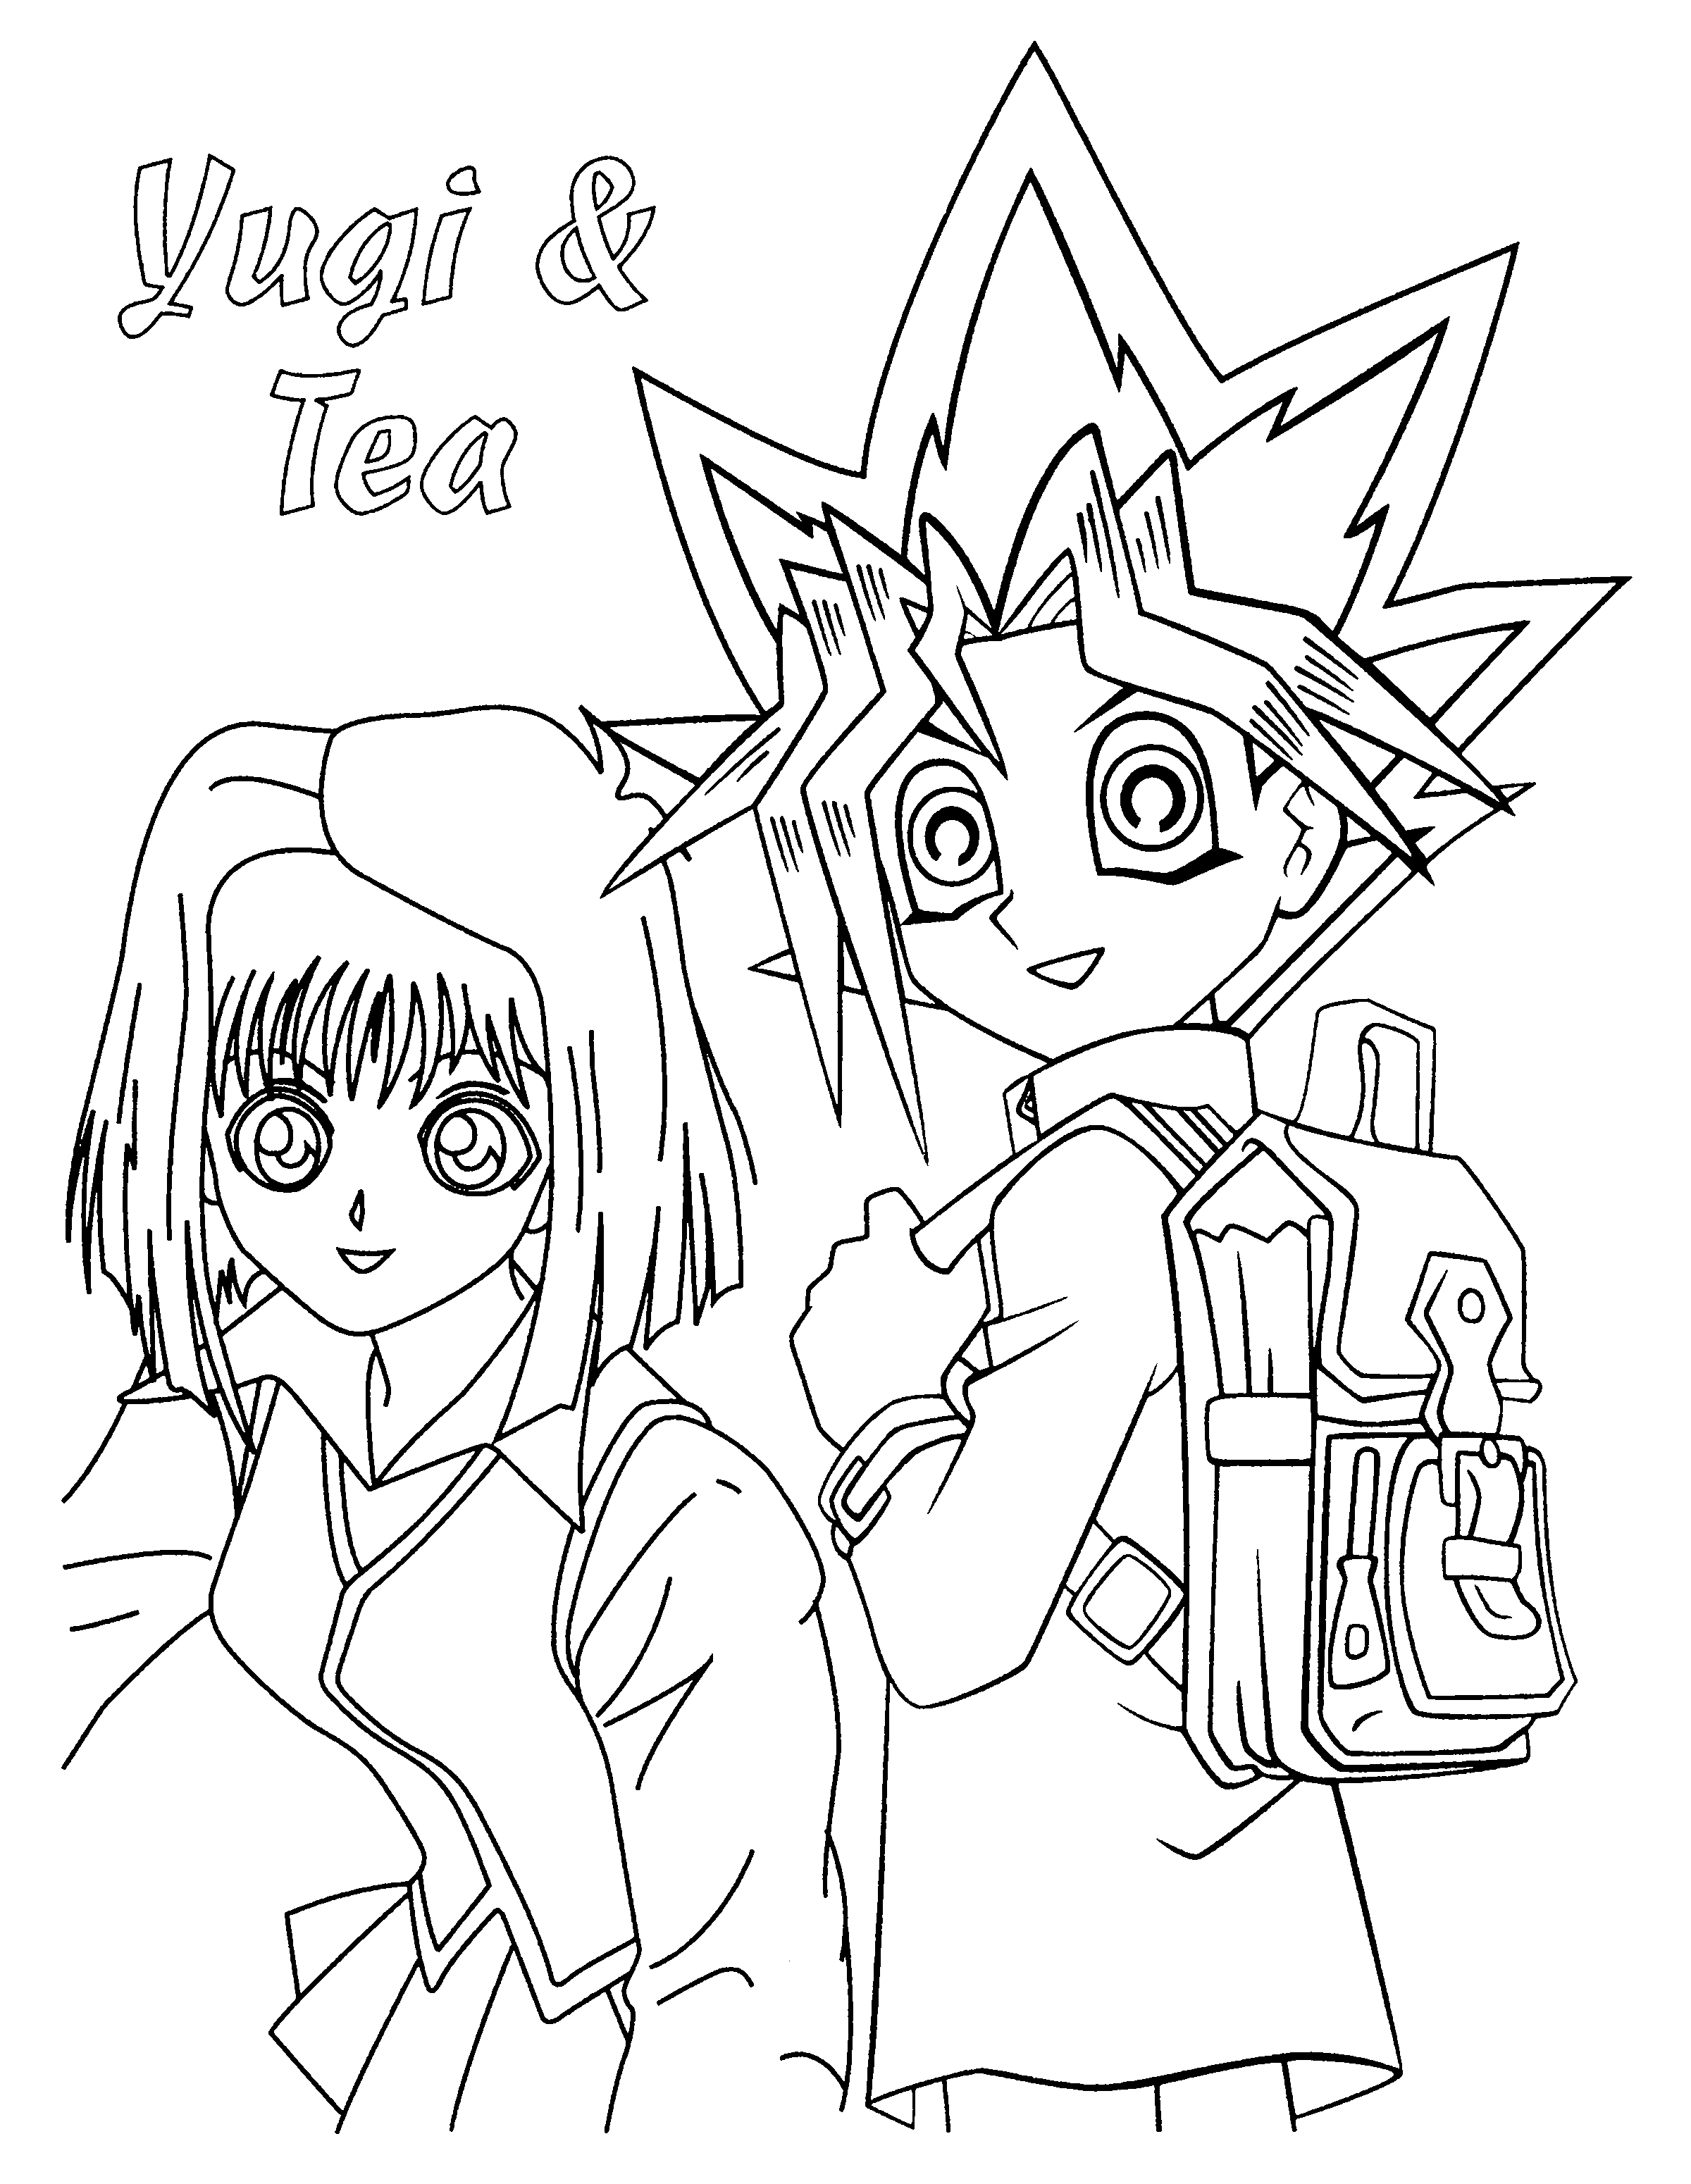 yugioh free coloring pages - photo #20